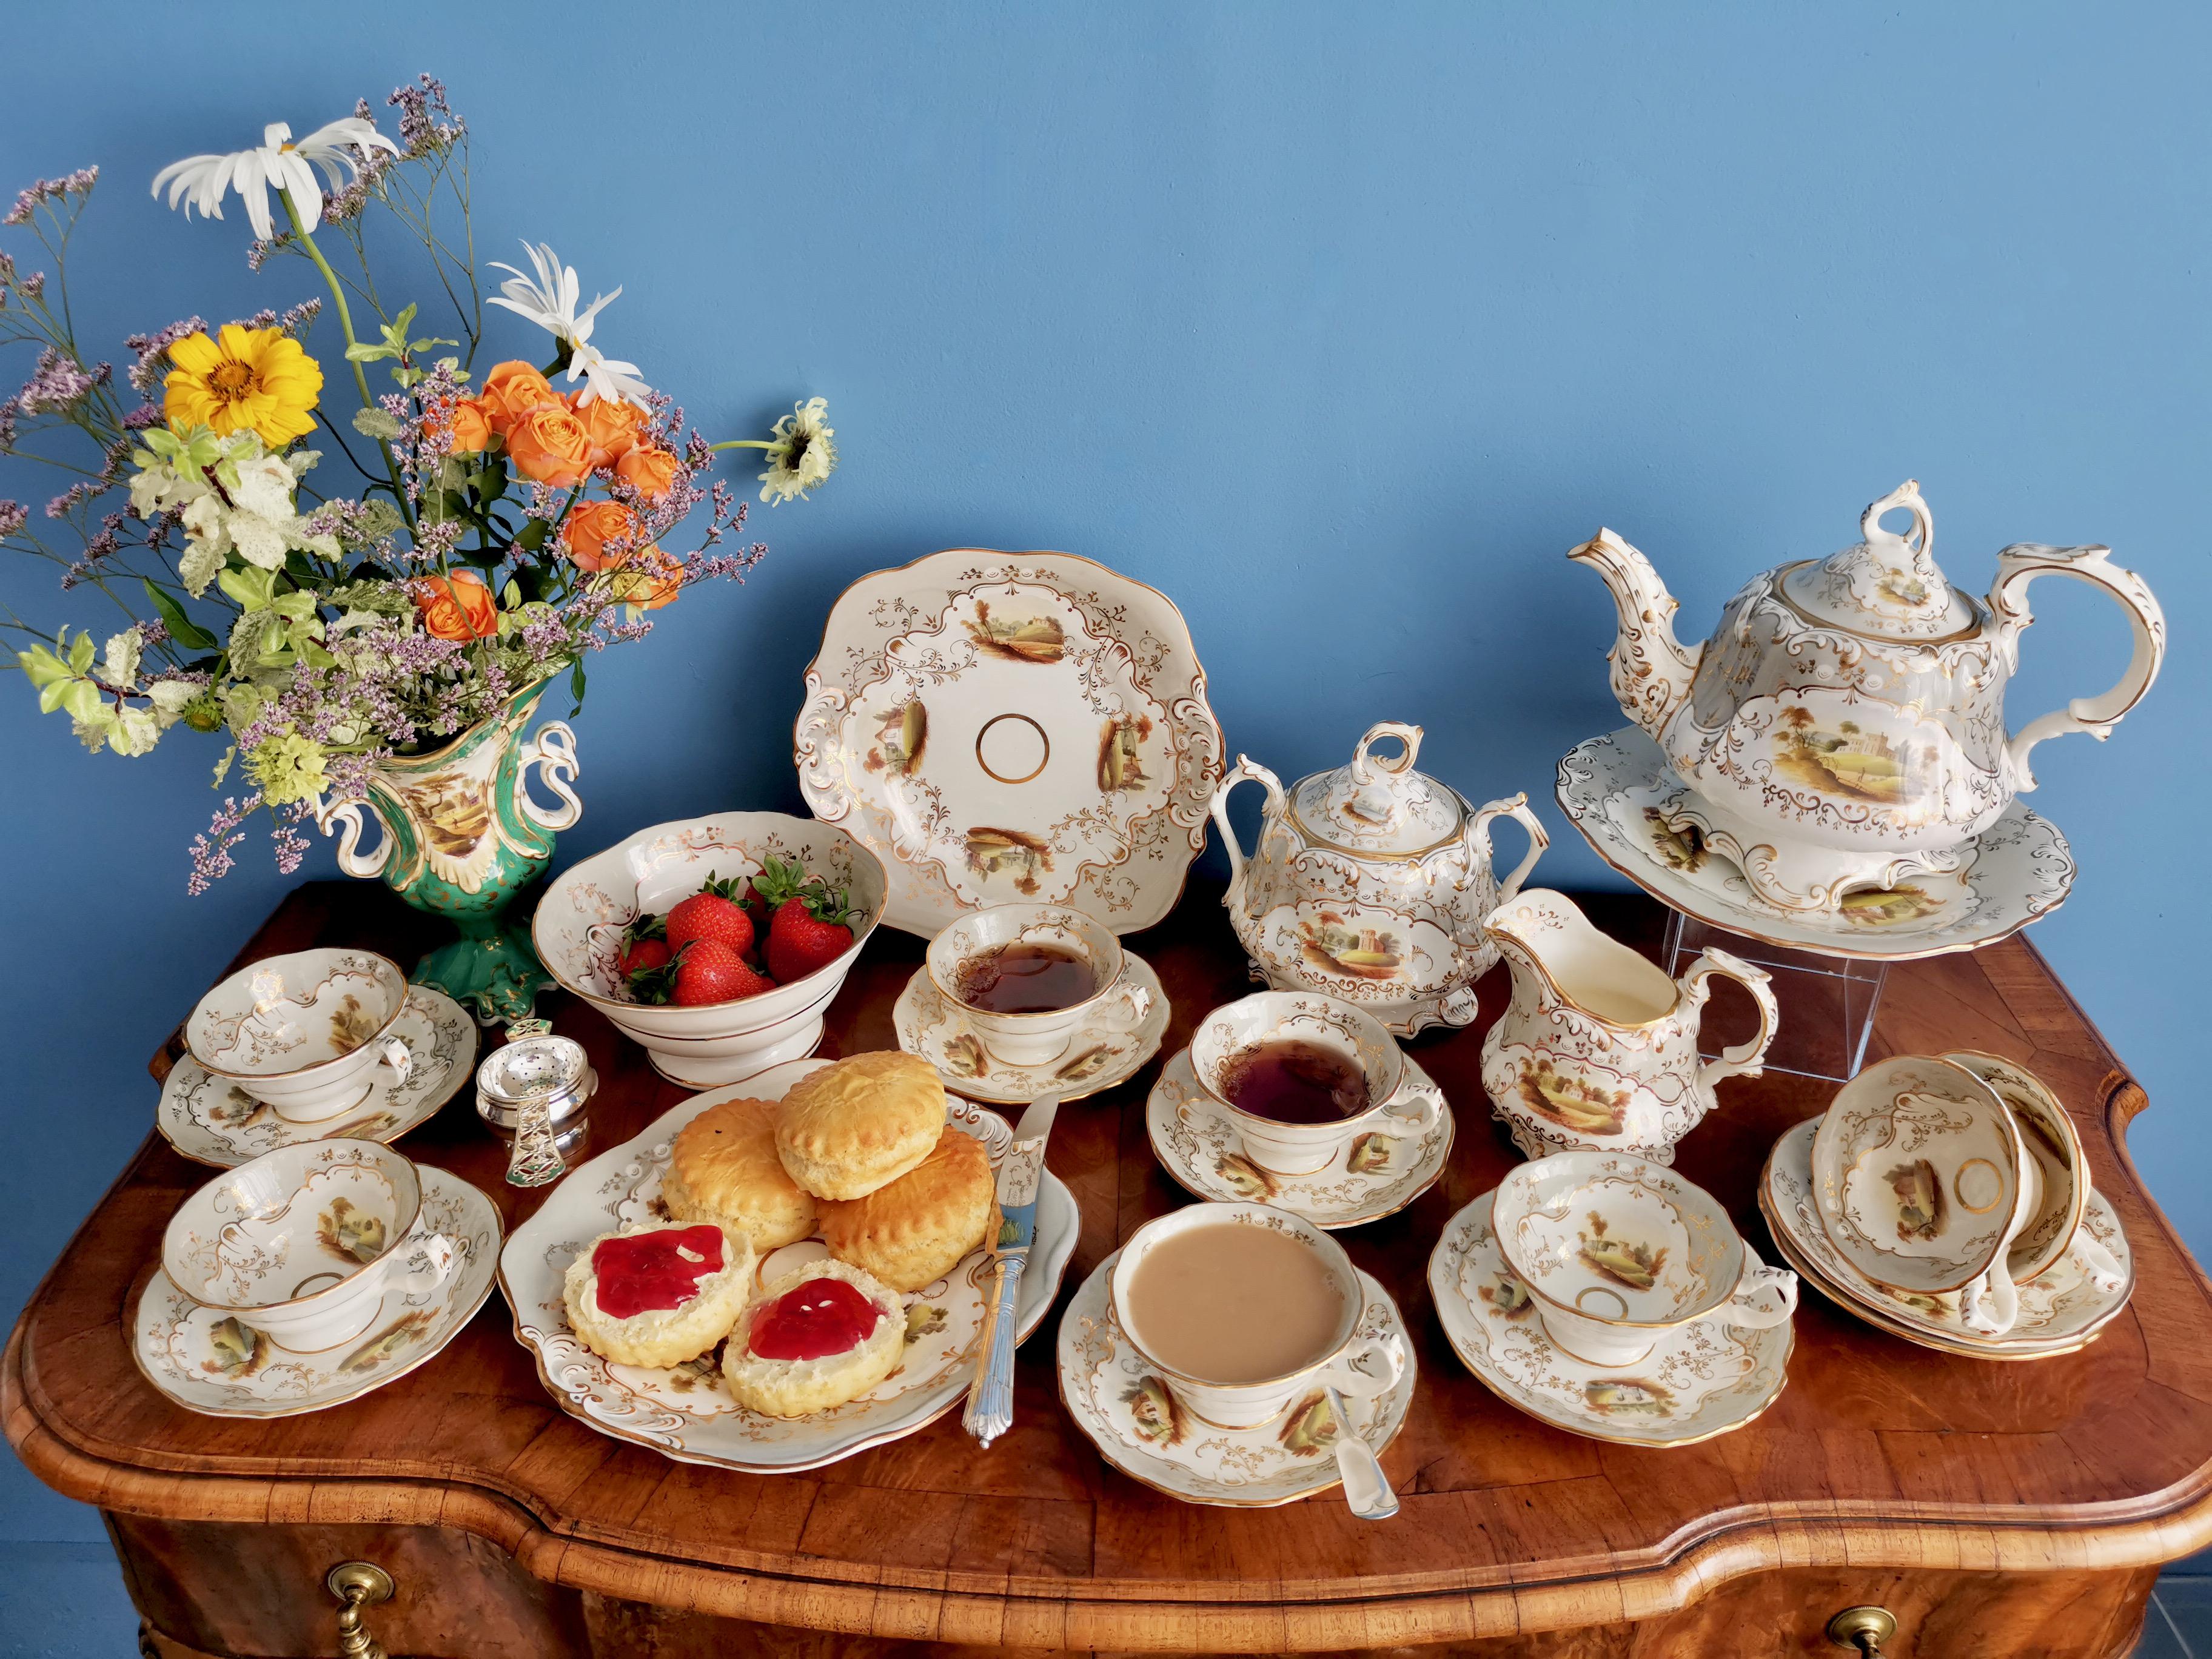 This is a stunning full tea service made by G.F. Bowers in 1843. The service consists of a teapot with cover on a stand, a sucrier with cover, a milk jug, two large cake plates, a slop bowl and eight teacups with saucers; 25 pieces in total.
 
The